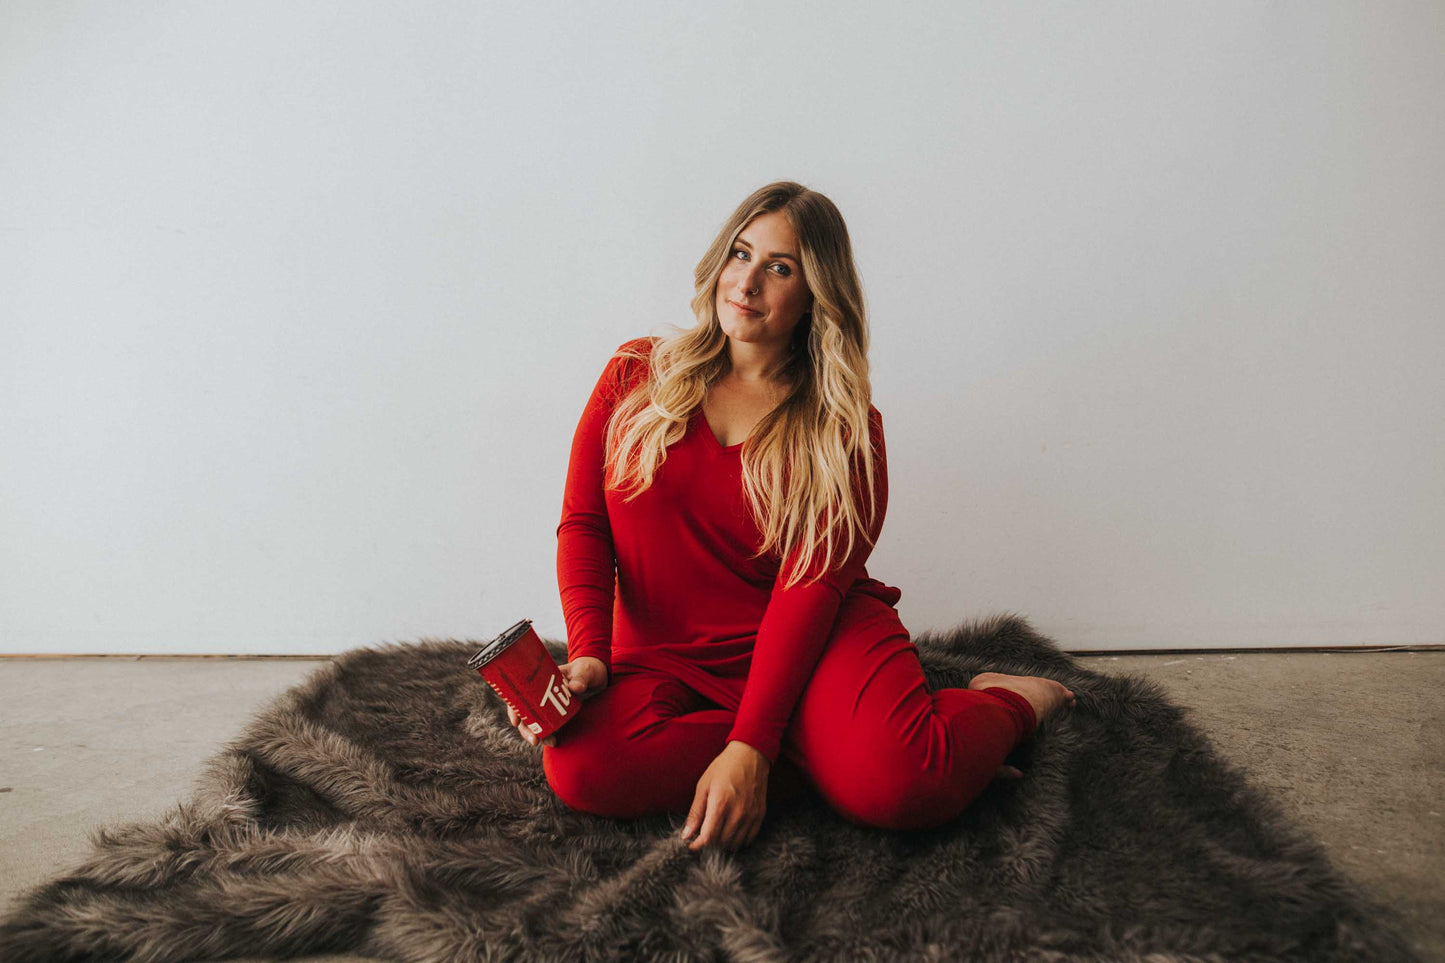 The Long Sleeve Romper in Red